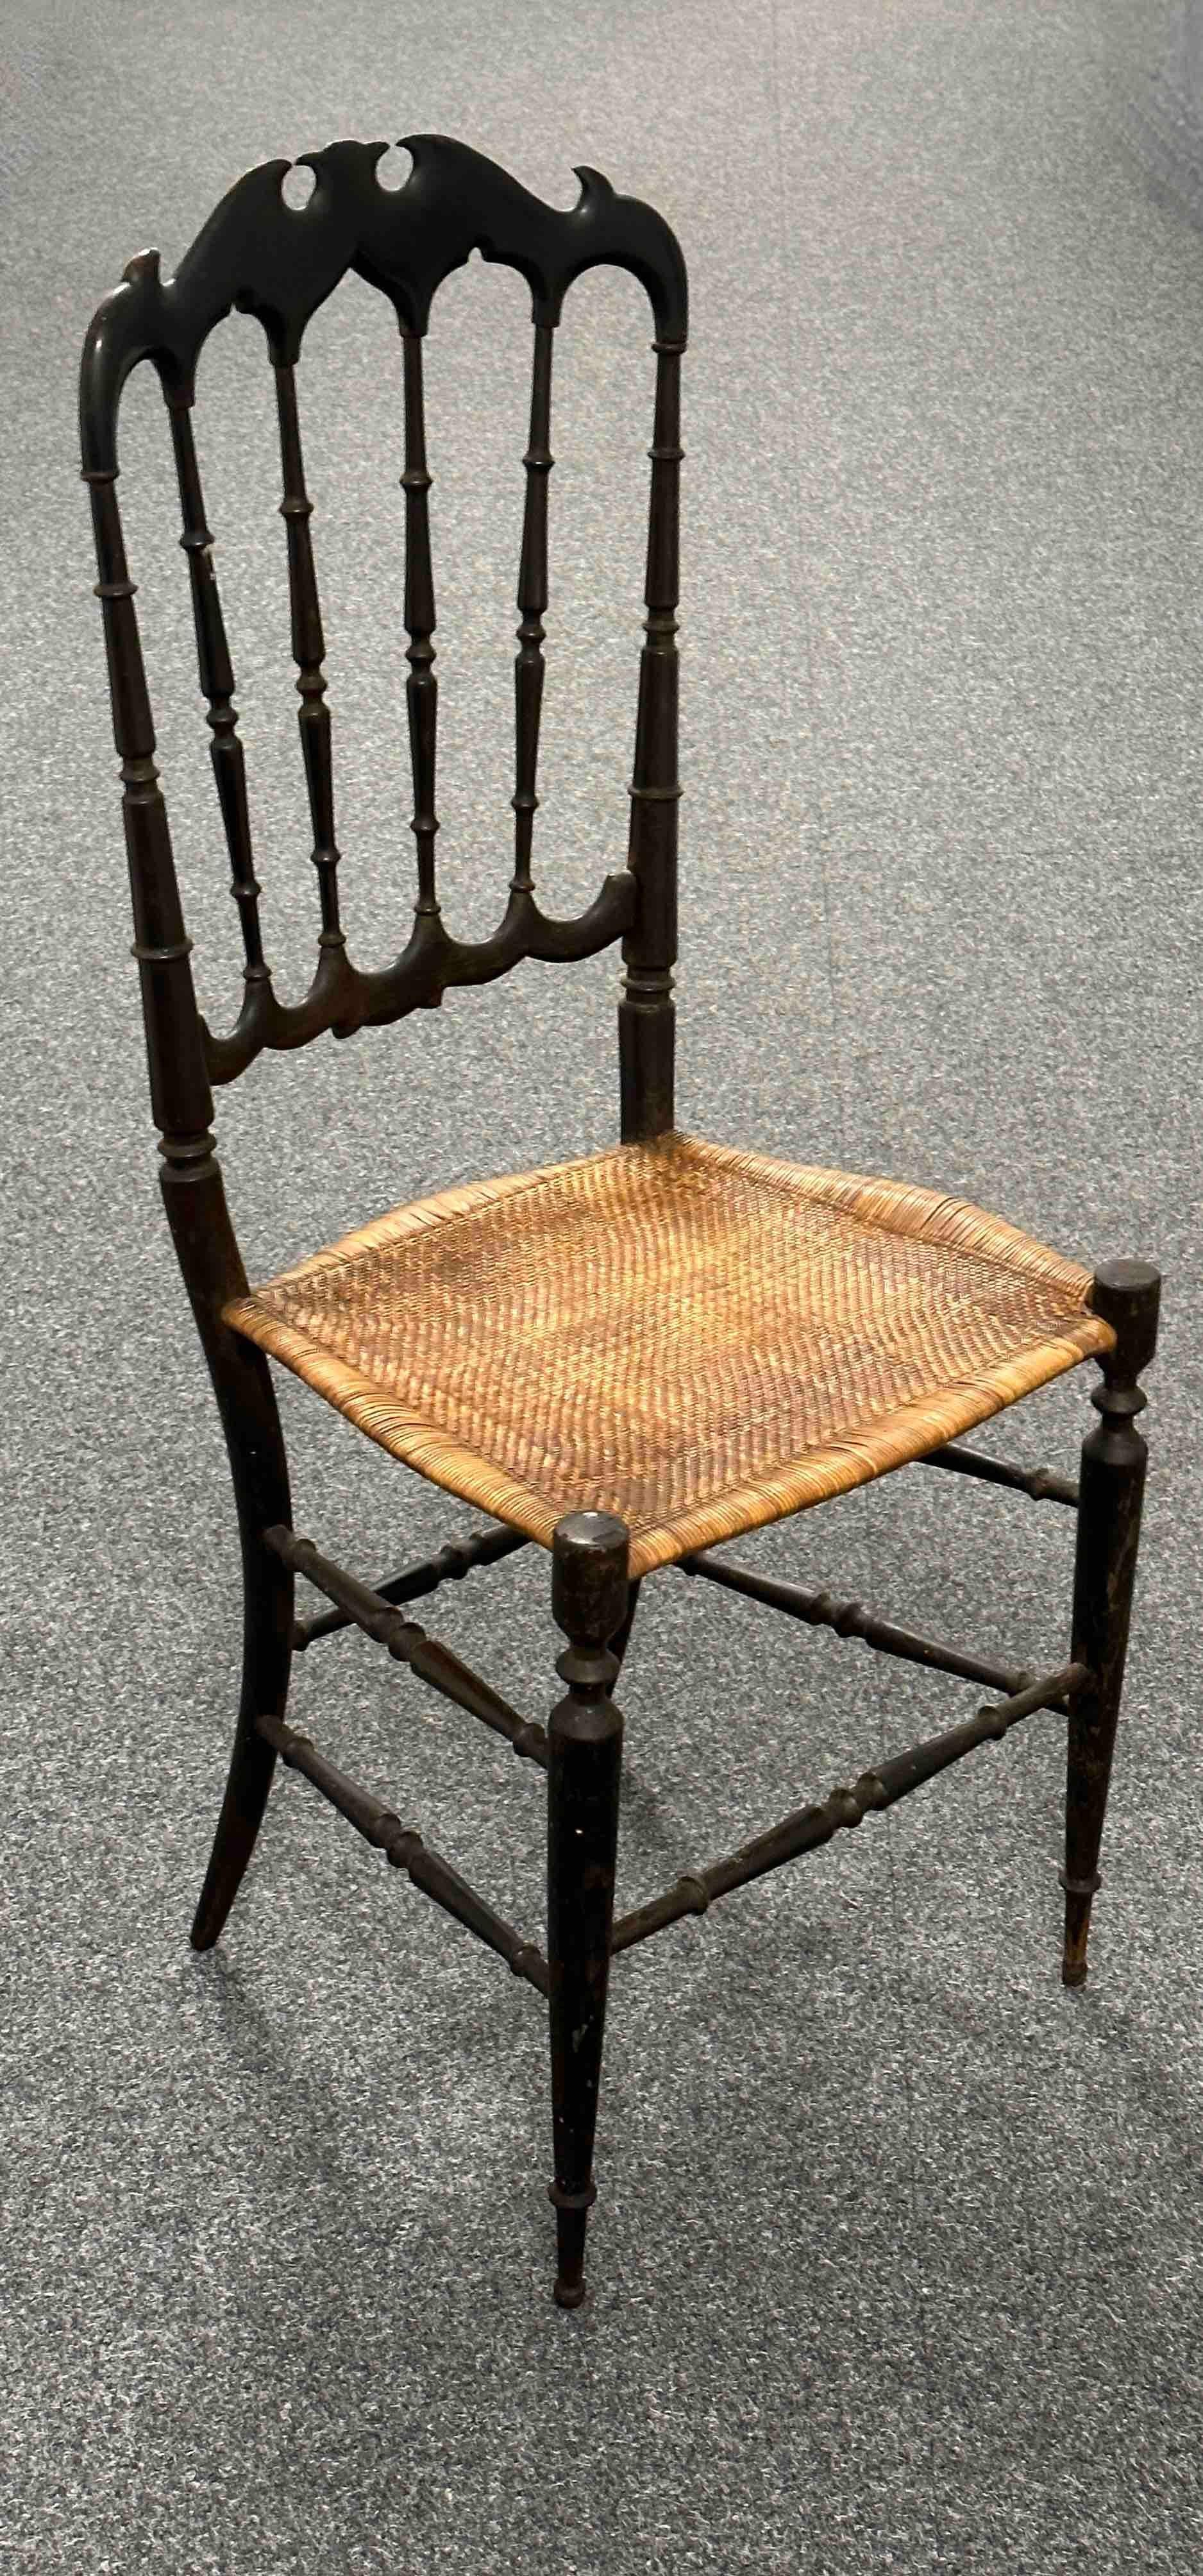 Beautiful Chiavari Wooden Chair Wicker Seat, Made in Liguria, Italy, 1930s For Sale 11